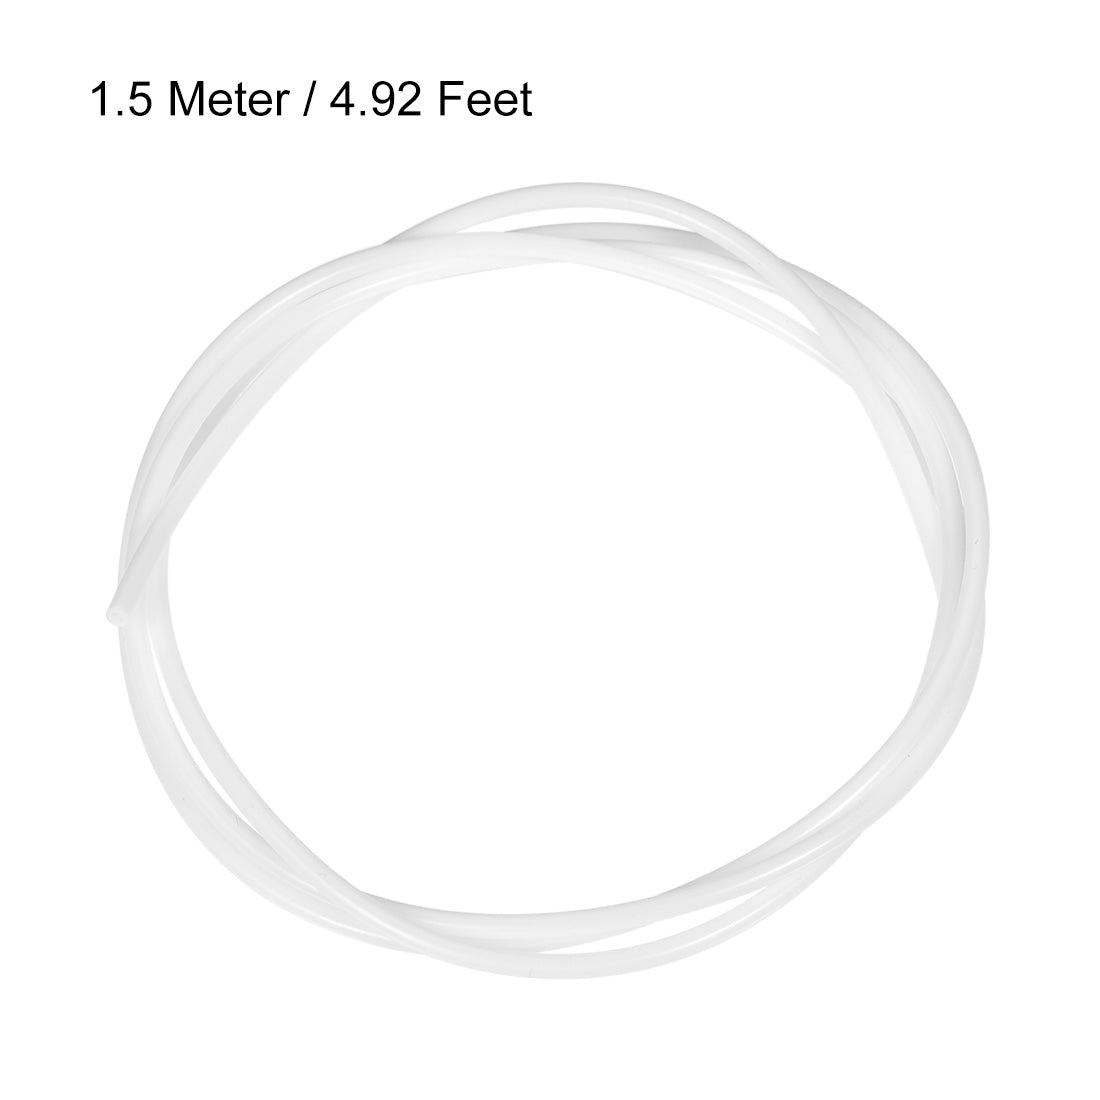 Uxcell Uxcell PTFE Tube 4.9Ft - ID 2mm x OD 4mm Fit 1.75 Filament for 3D Printer White